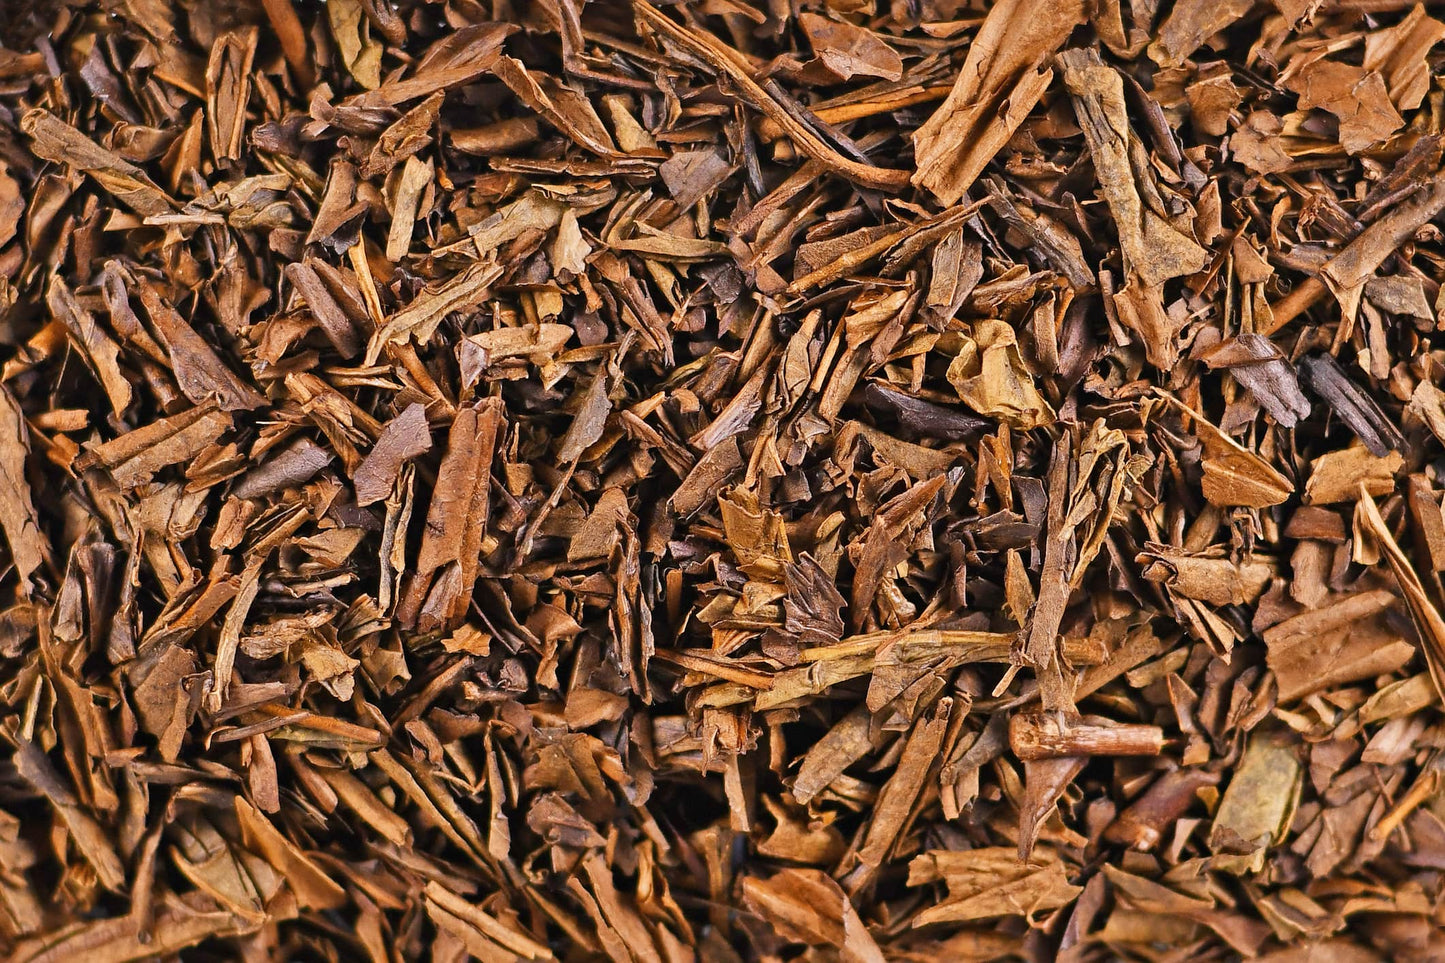 Our organic Hojicha (roasted green tea) is a low caffeine and naturally sweet tea that is ideal for everyday sipping.